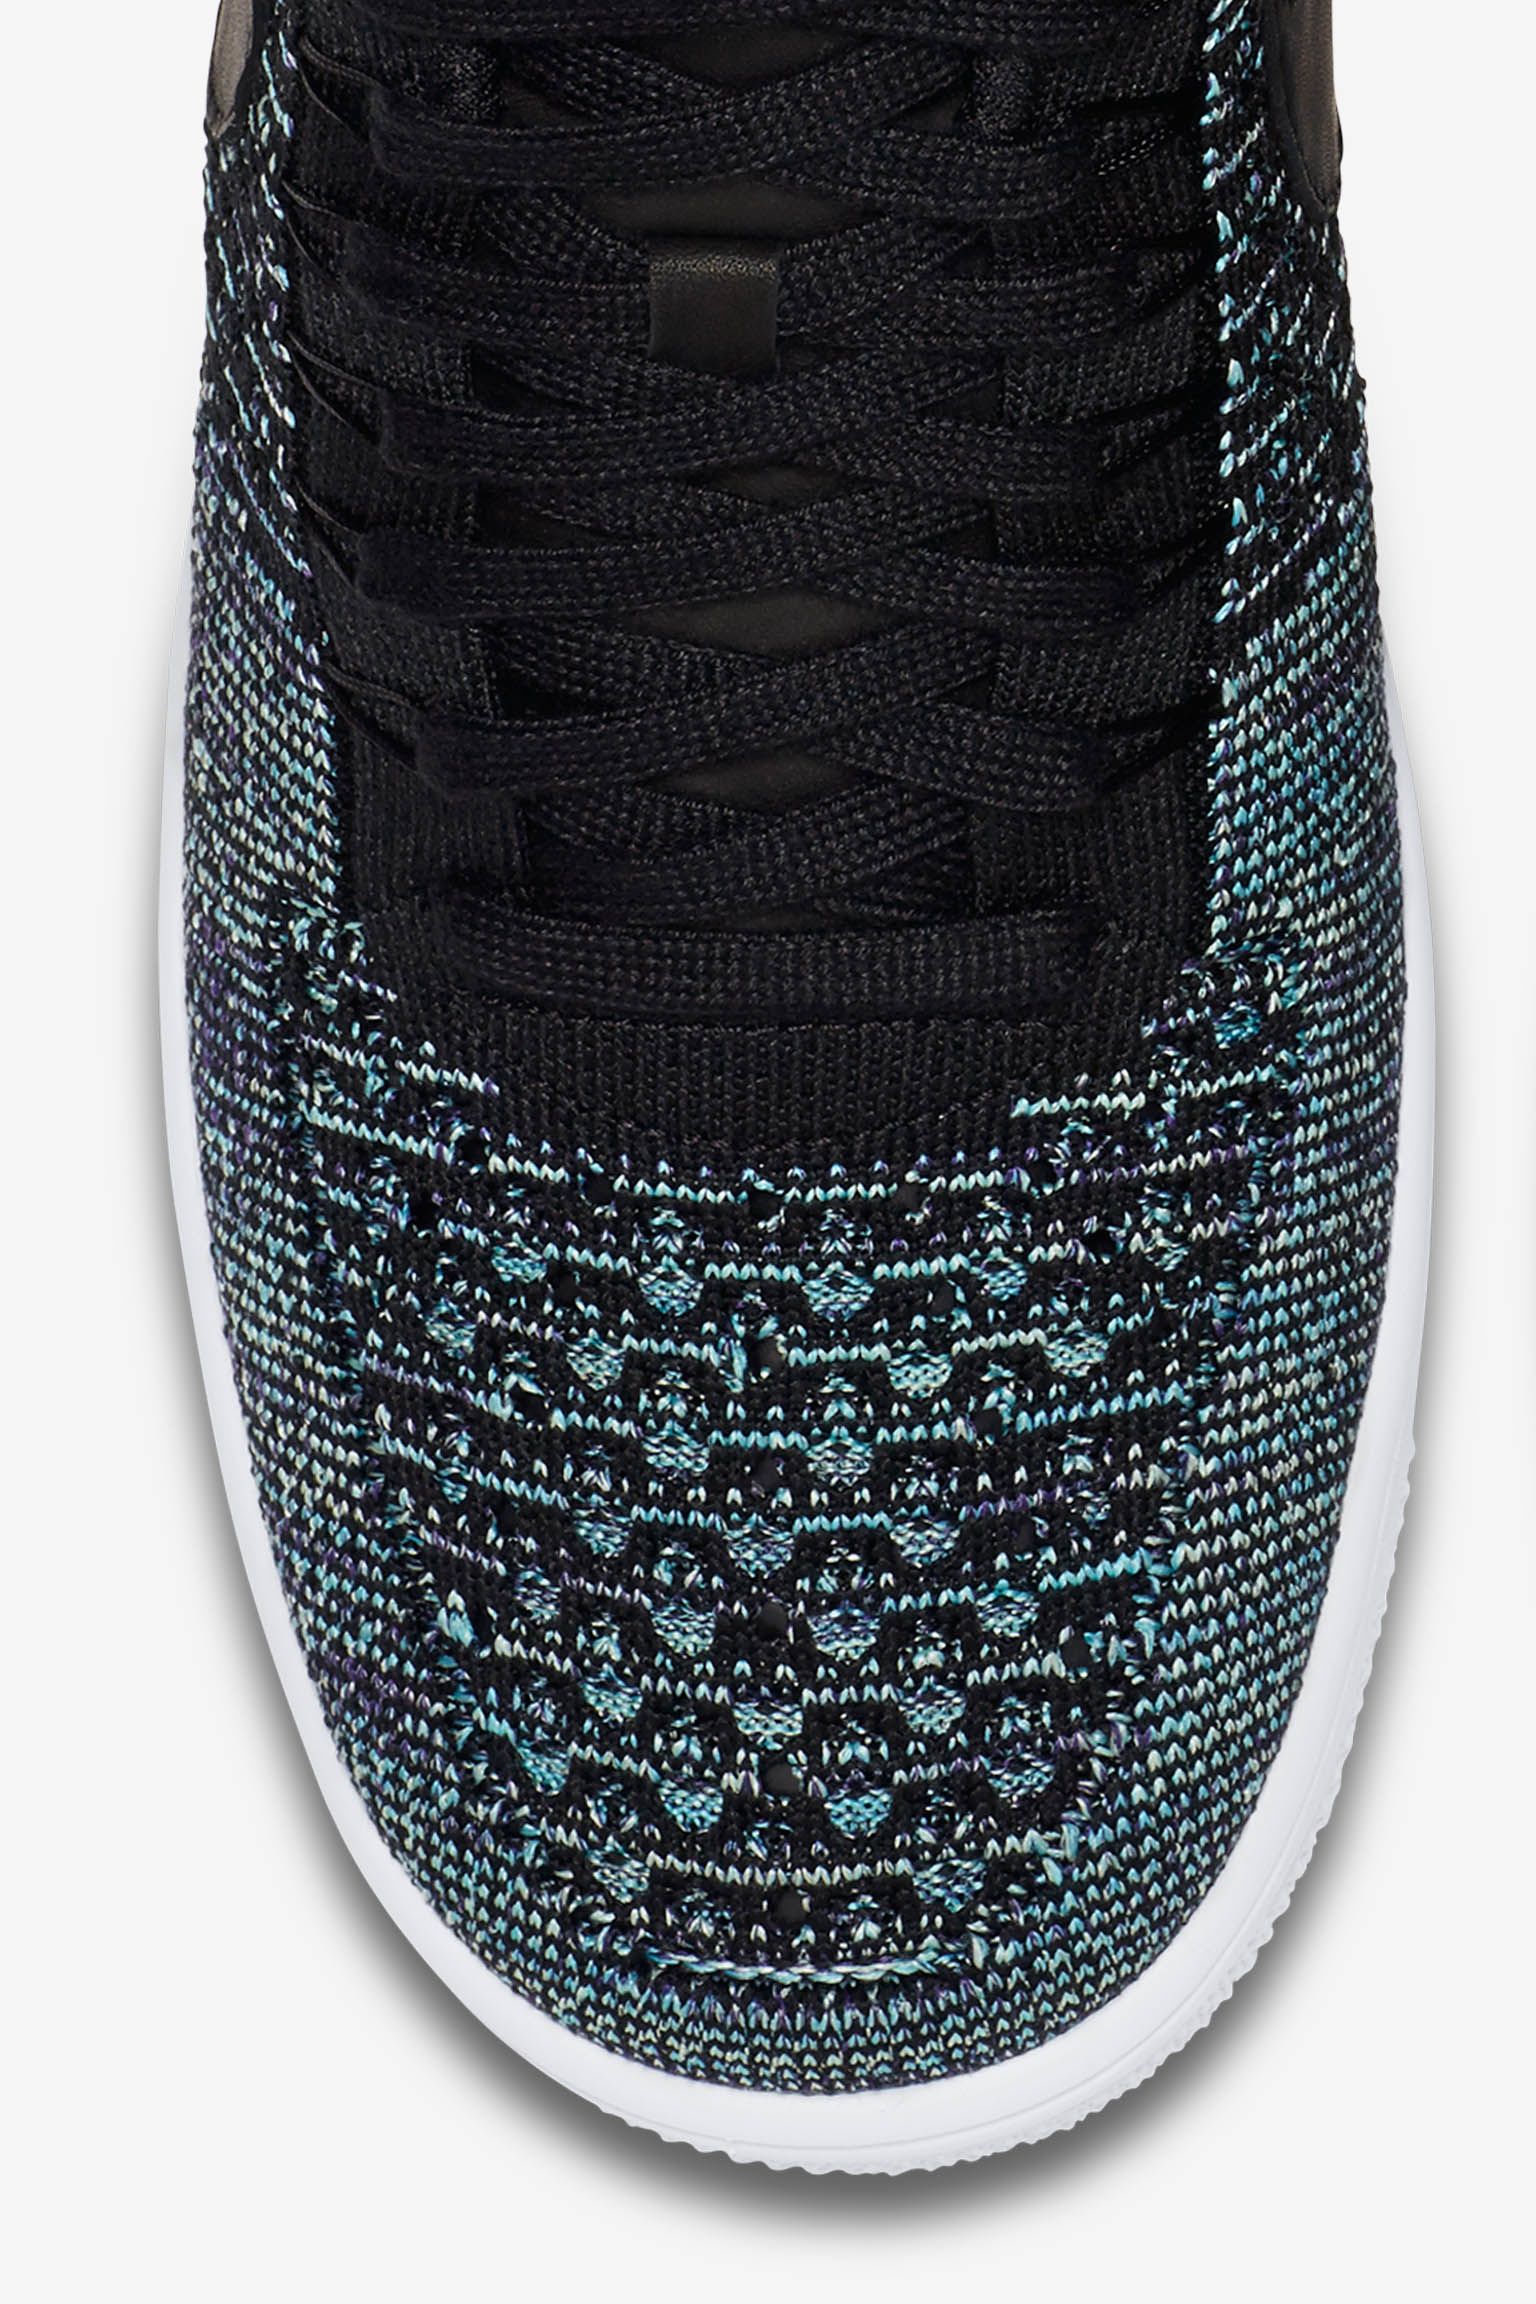 nike air force one low flyknit